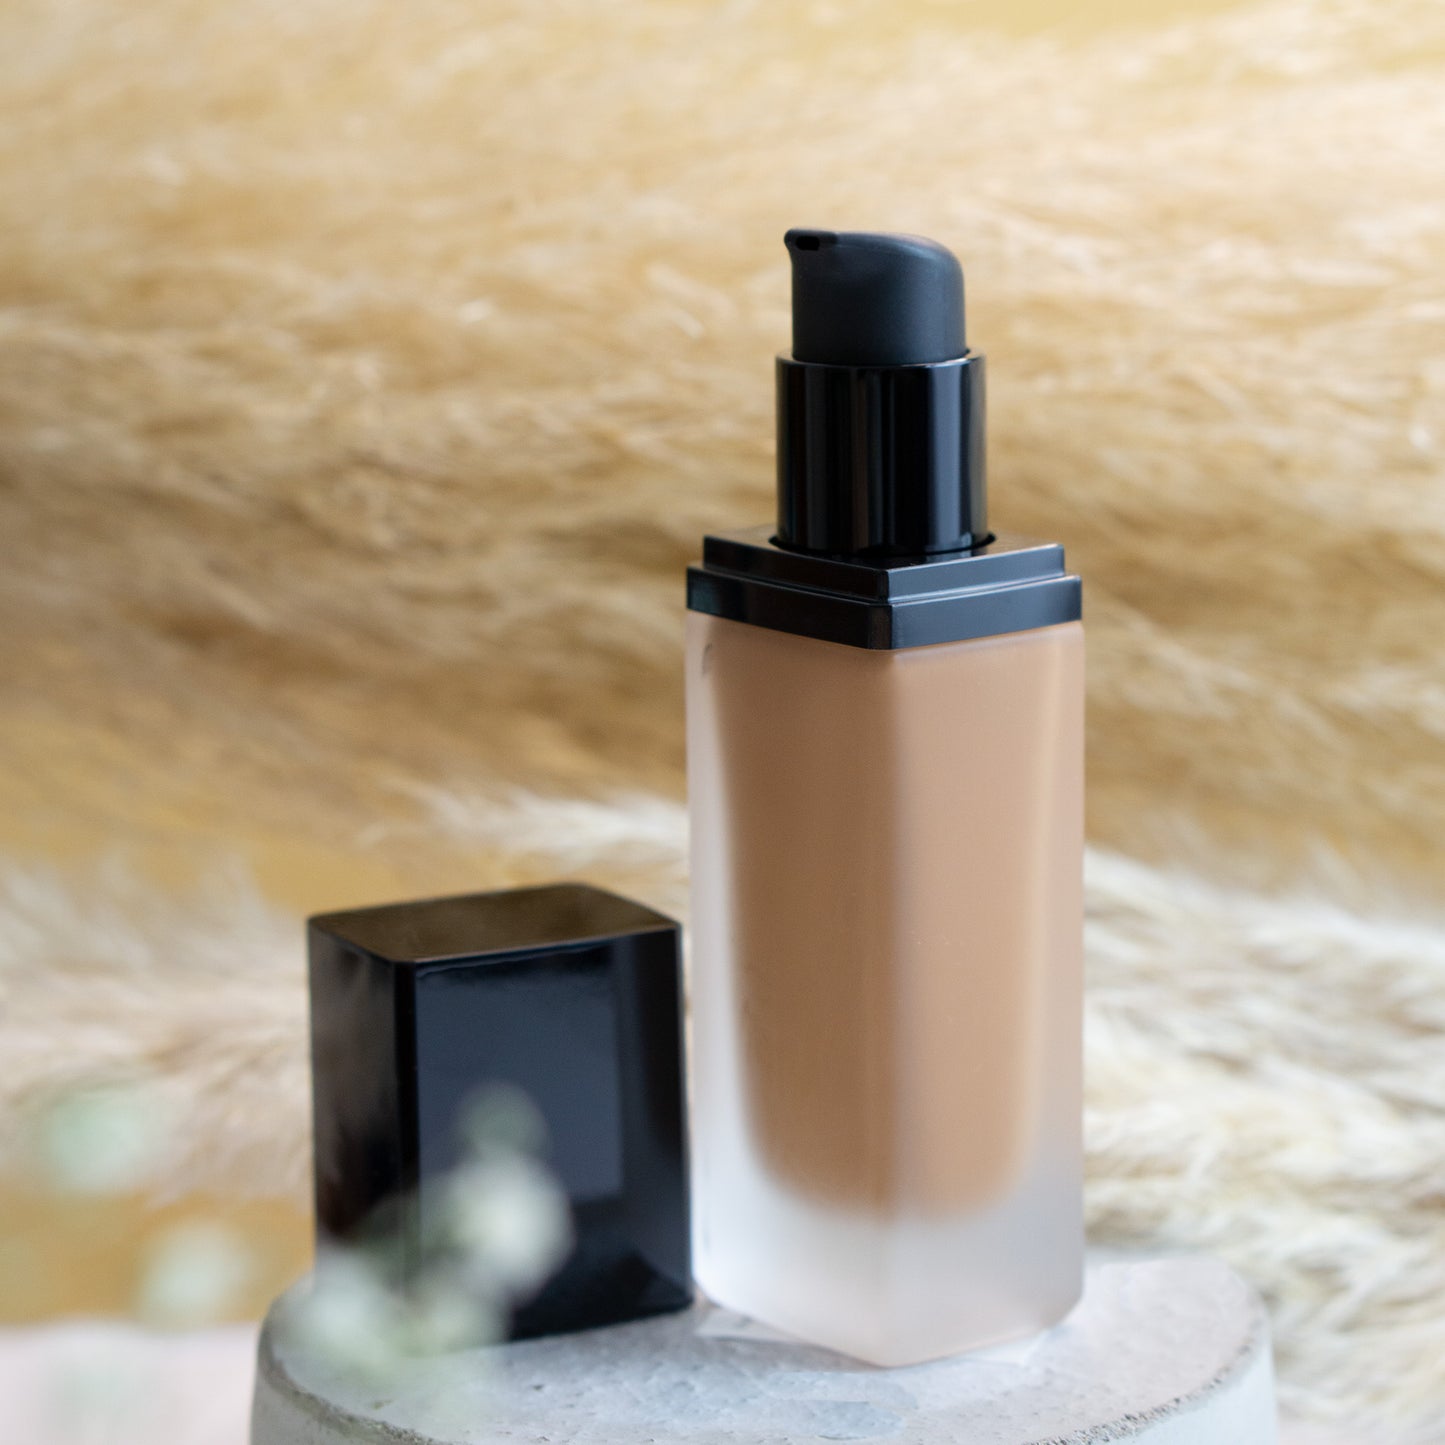 Foundation with SPF - Maple